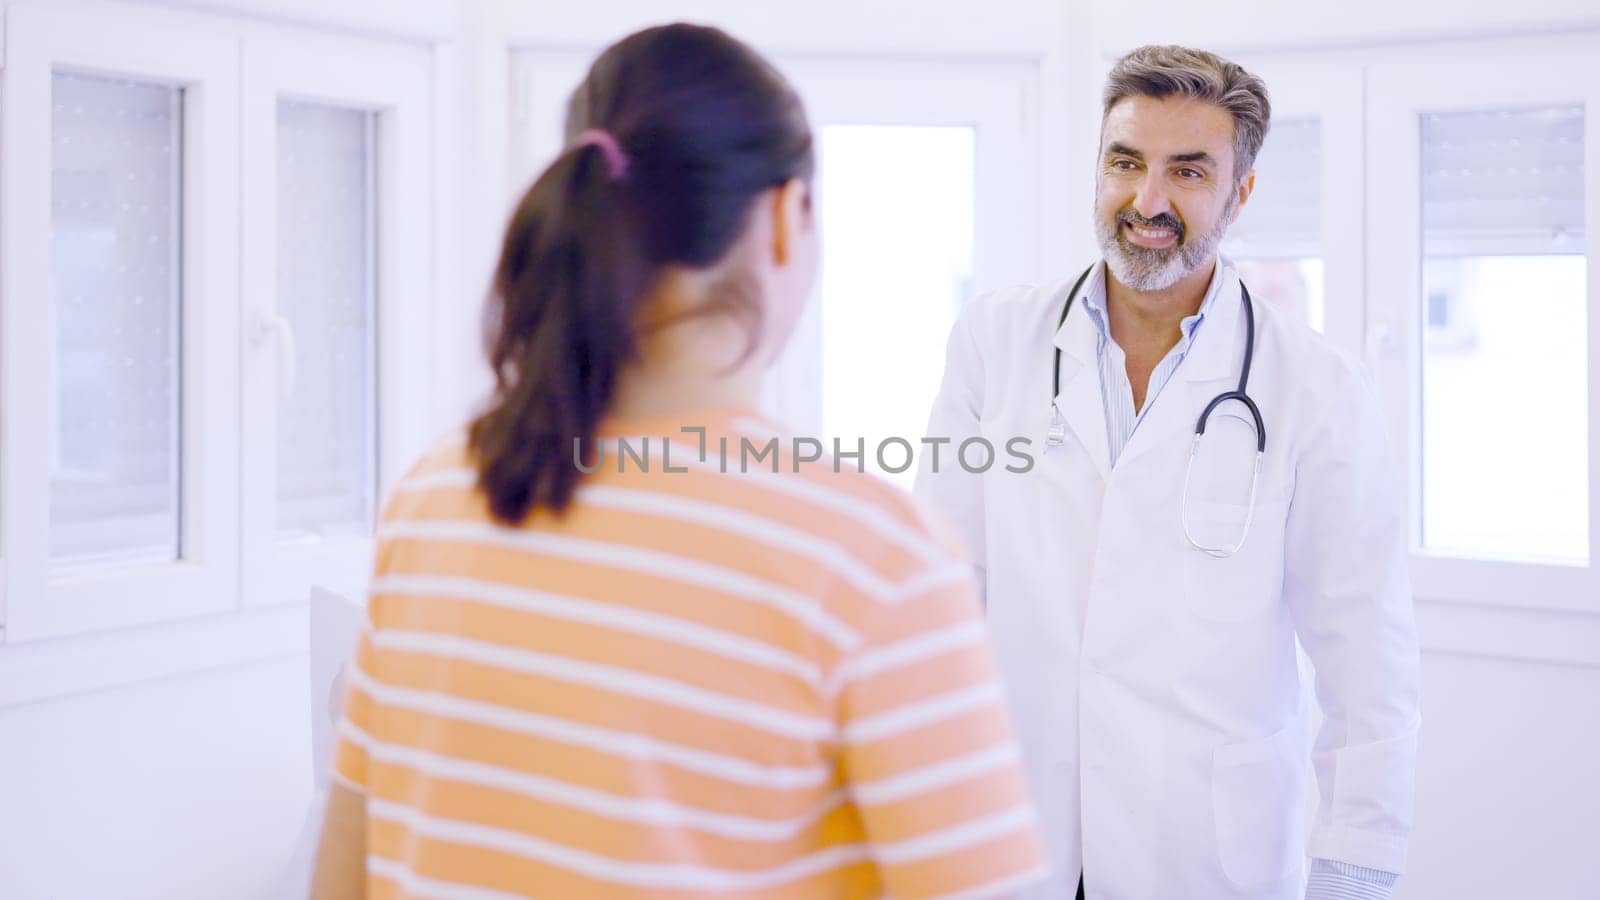 Female patient entering the consultation greeting the doctor in a medical clinic